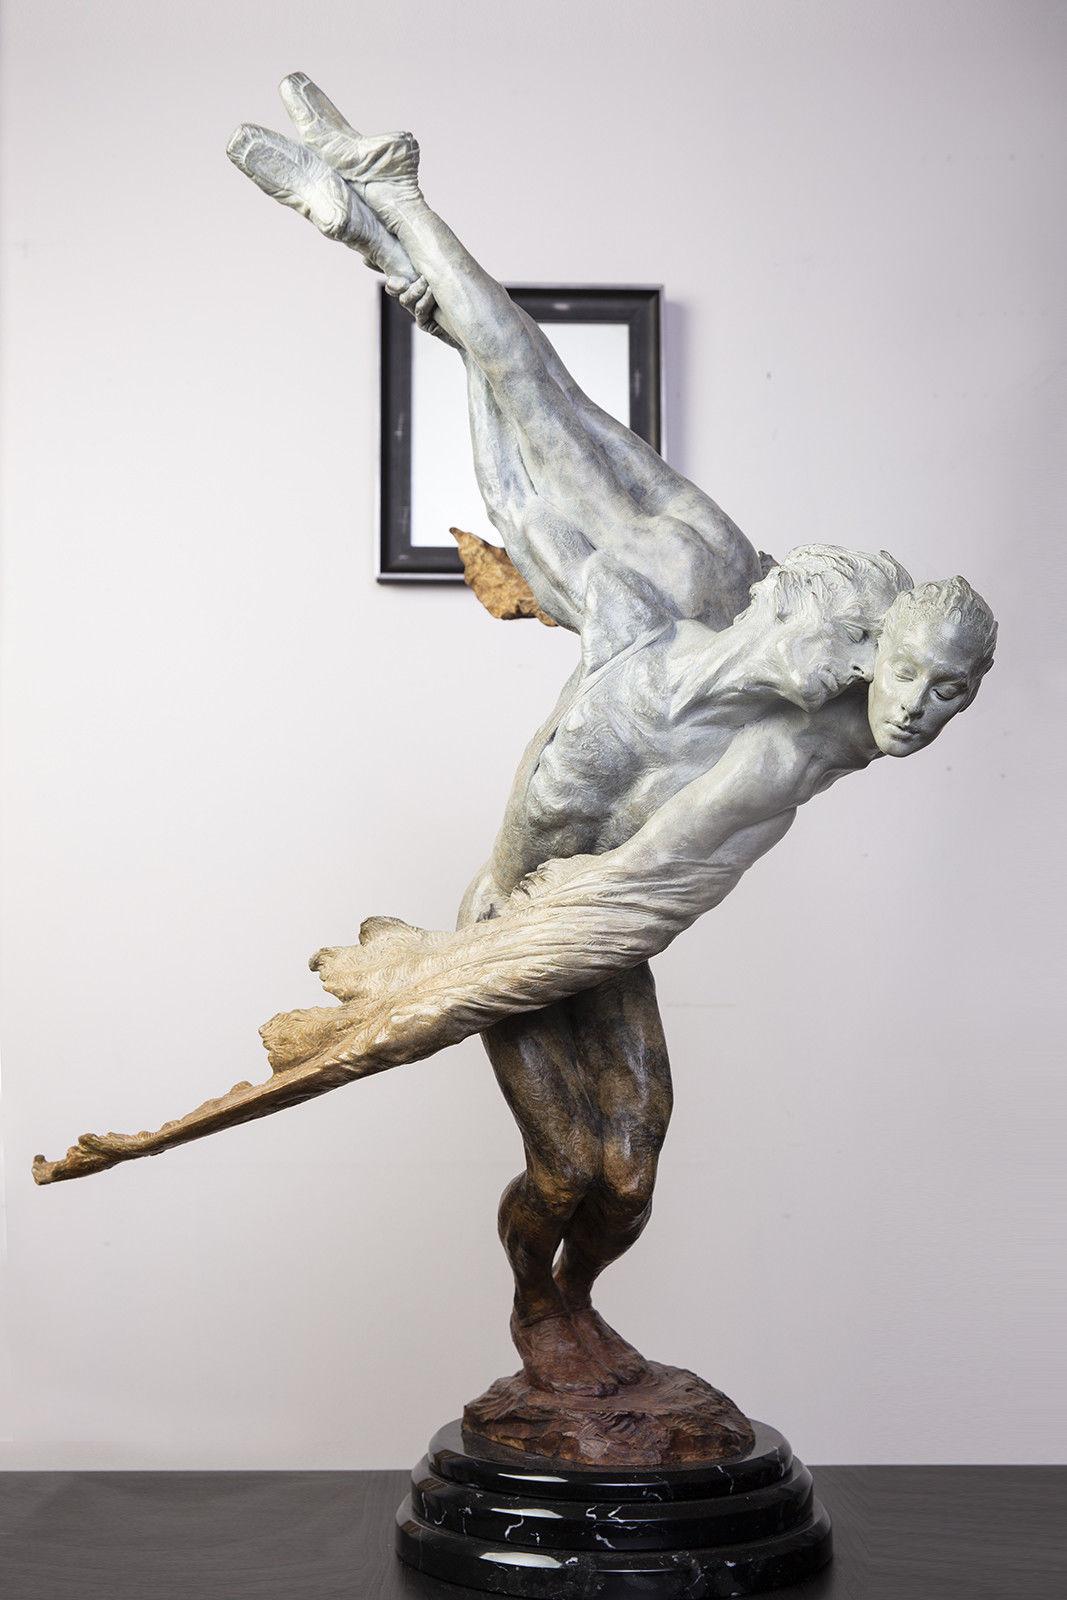 Richard MacDonald – Doves, Third Life, 1990
Bronze Sculpture
Edition: Edition of 90, Sold Out Retired
Size: 36 x 16 x 24 inches
Certificate of Authenticity included

One of the greatest living figurative sculptors, Richard MacDonald has given new